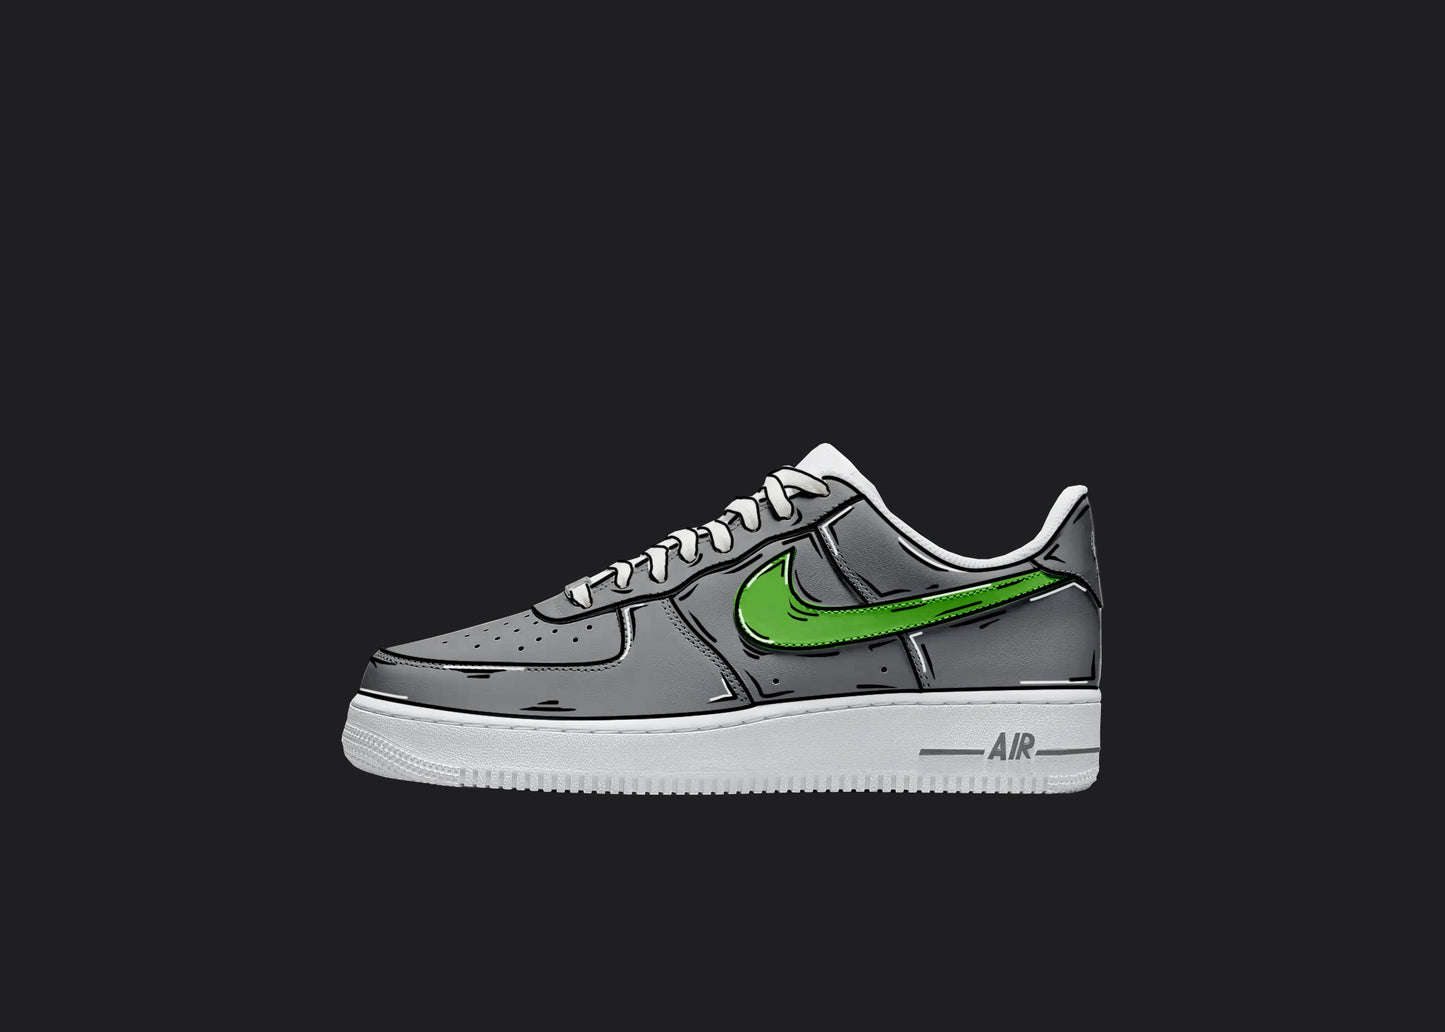 gray and green colored nike air force 1 sneaker side view on a black background, the gray and green colors on the nike also feature a cartoon like outline custom hand painted details all over the sneaker